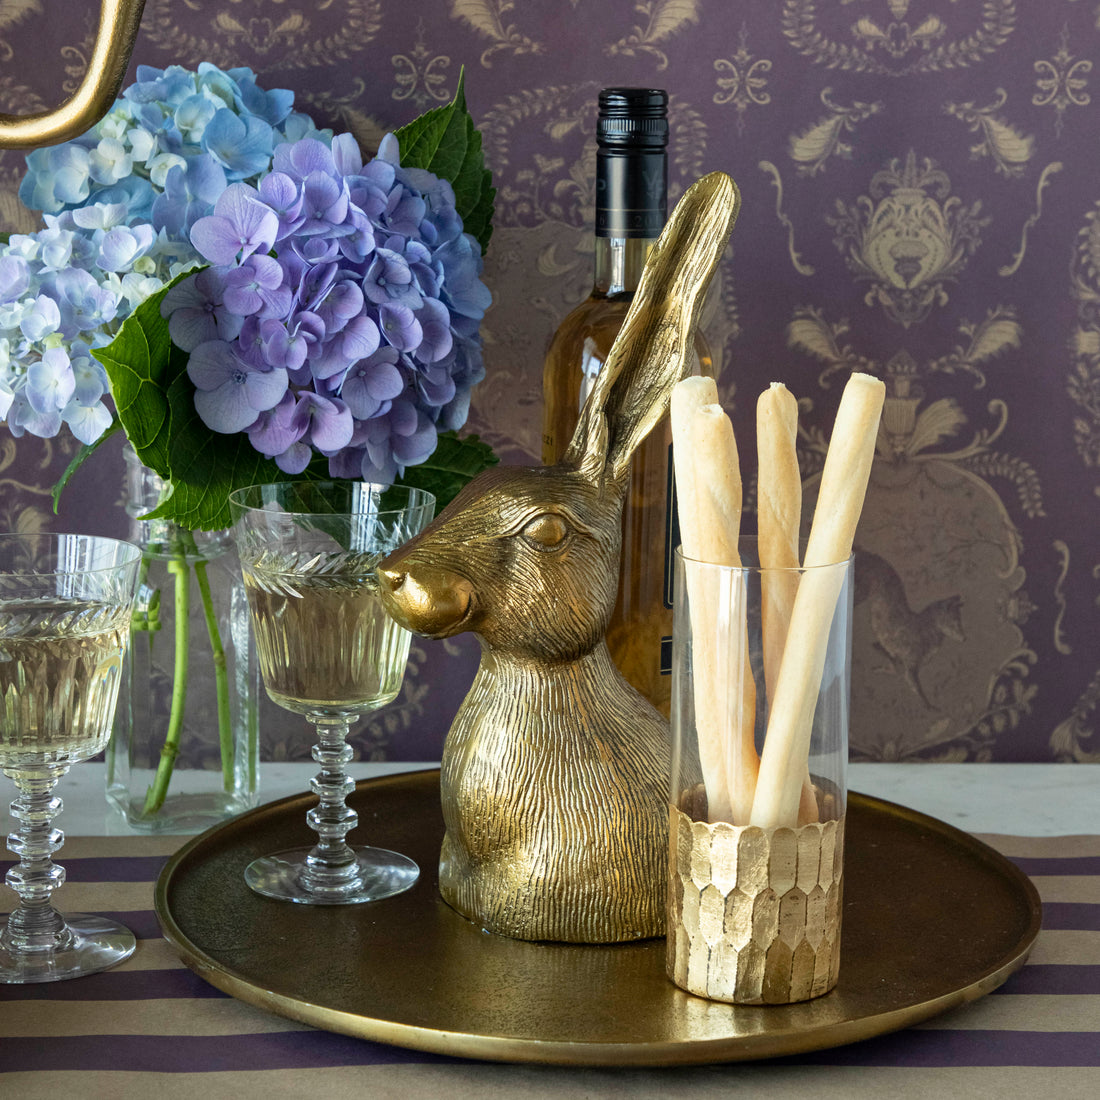 A Hare Platter by Accent Decor, with a gold bunny on a bronze platter next to a vase of flowers on a table, adding a touch of whimsy to the setting.